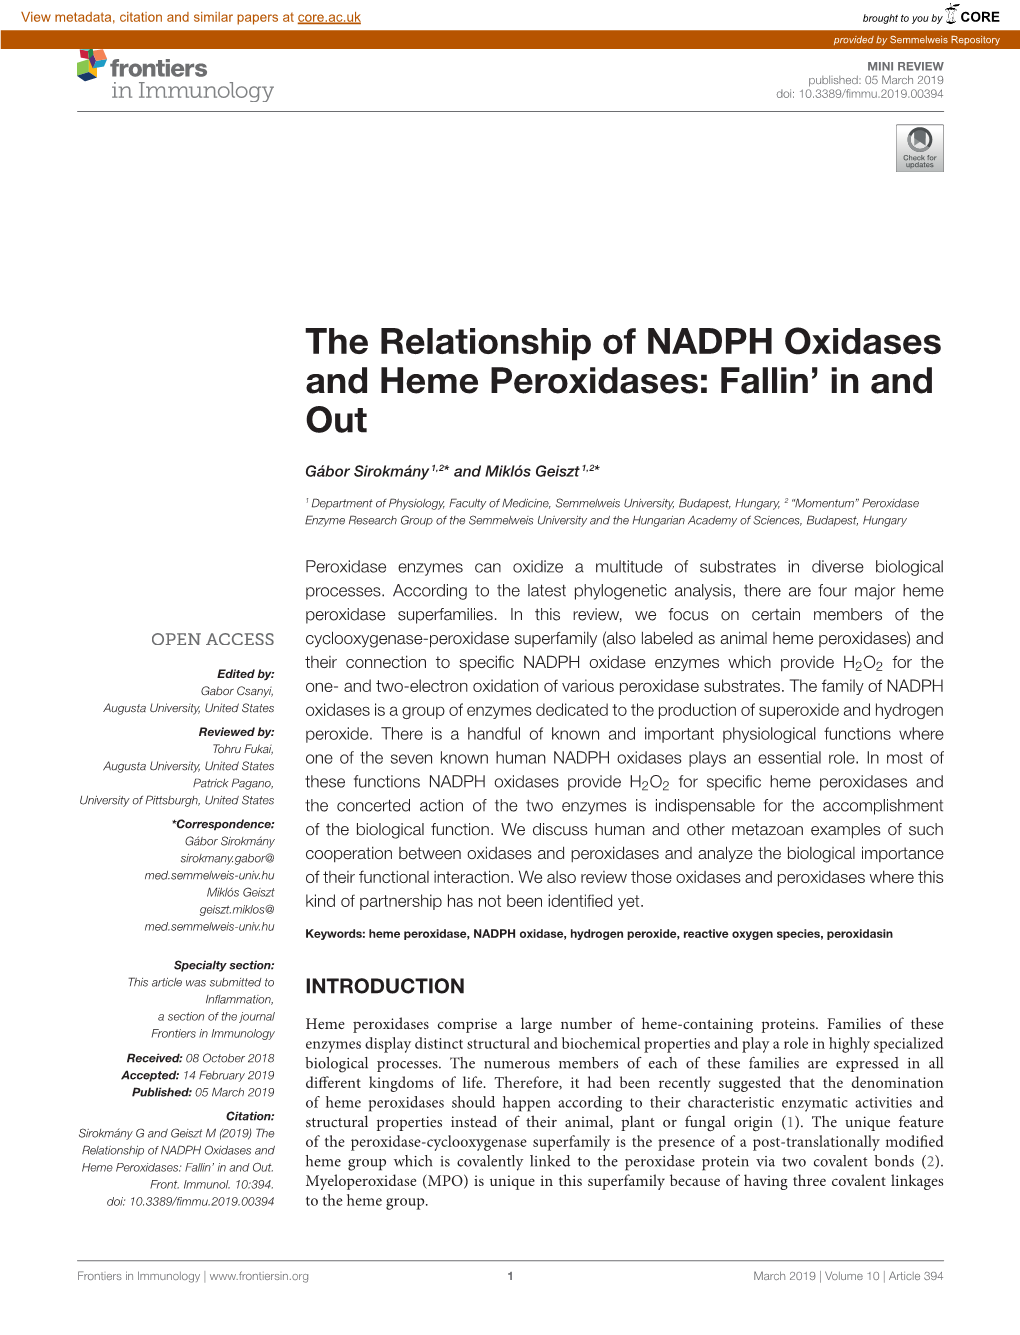 The Relationship of NADPH Oxidases and Heme Peroxidases: Fallin’ in and Out